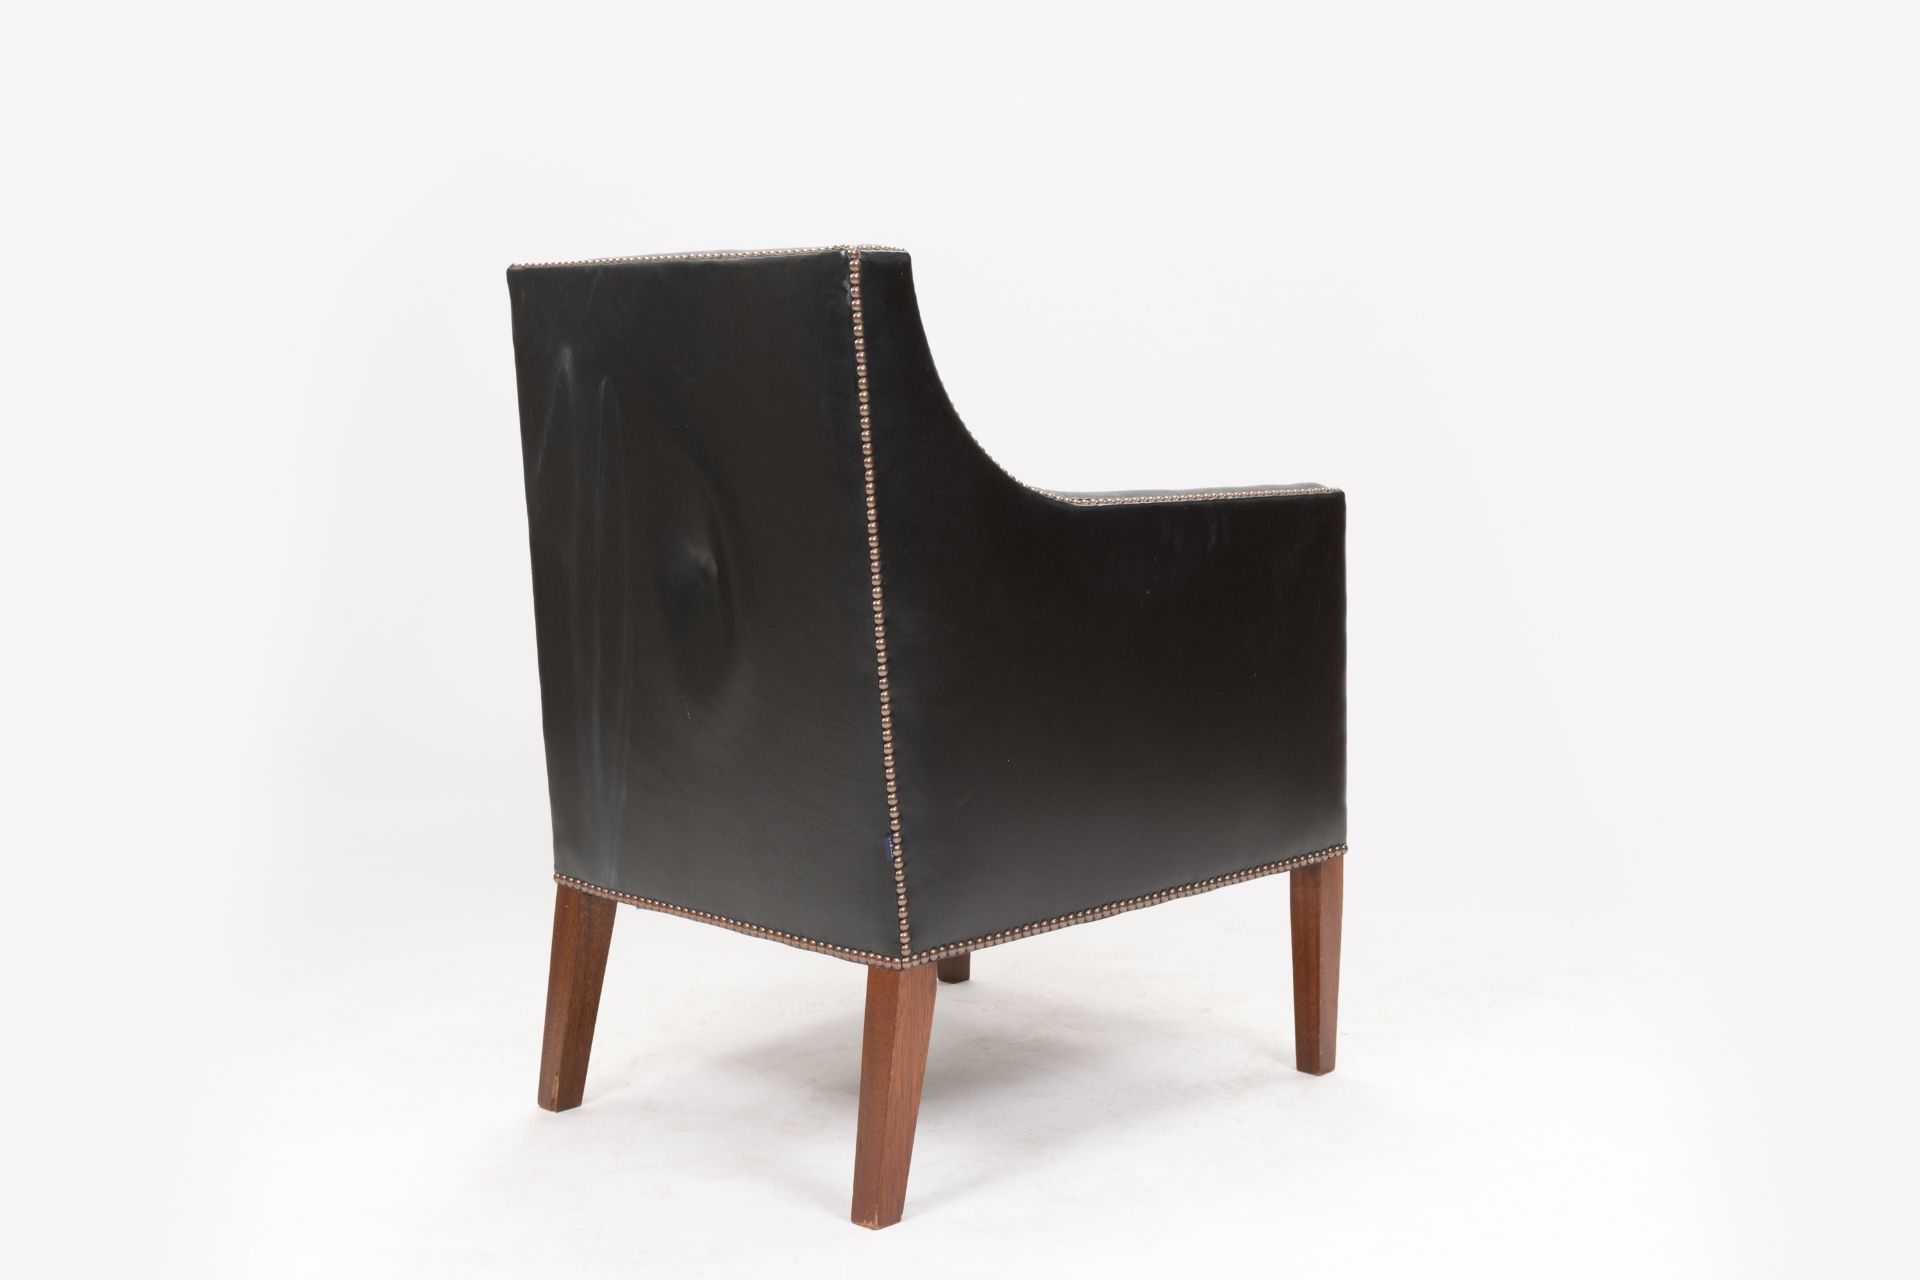 David Linley Lord Nelson Armchair - Image 4 of 7